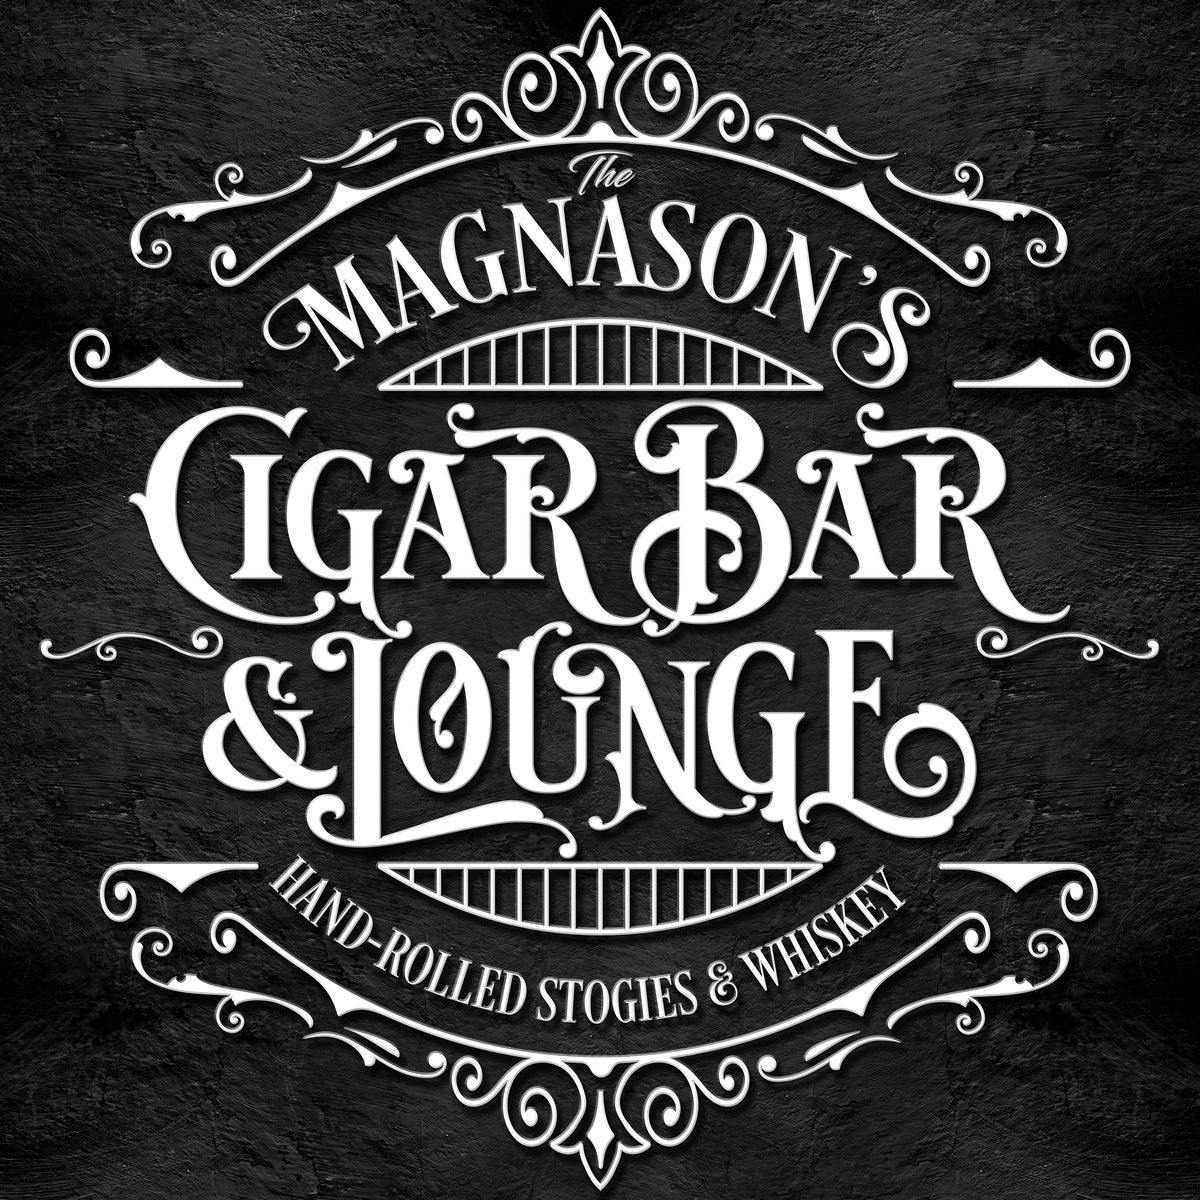 Cigar Bar Sign on black stone with white lettering that says: family name, Cigar Bar and Lounge, hand rolled stogies and whiskey